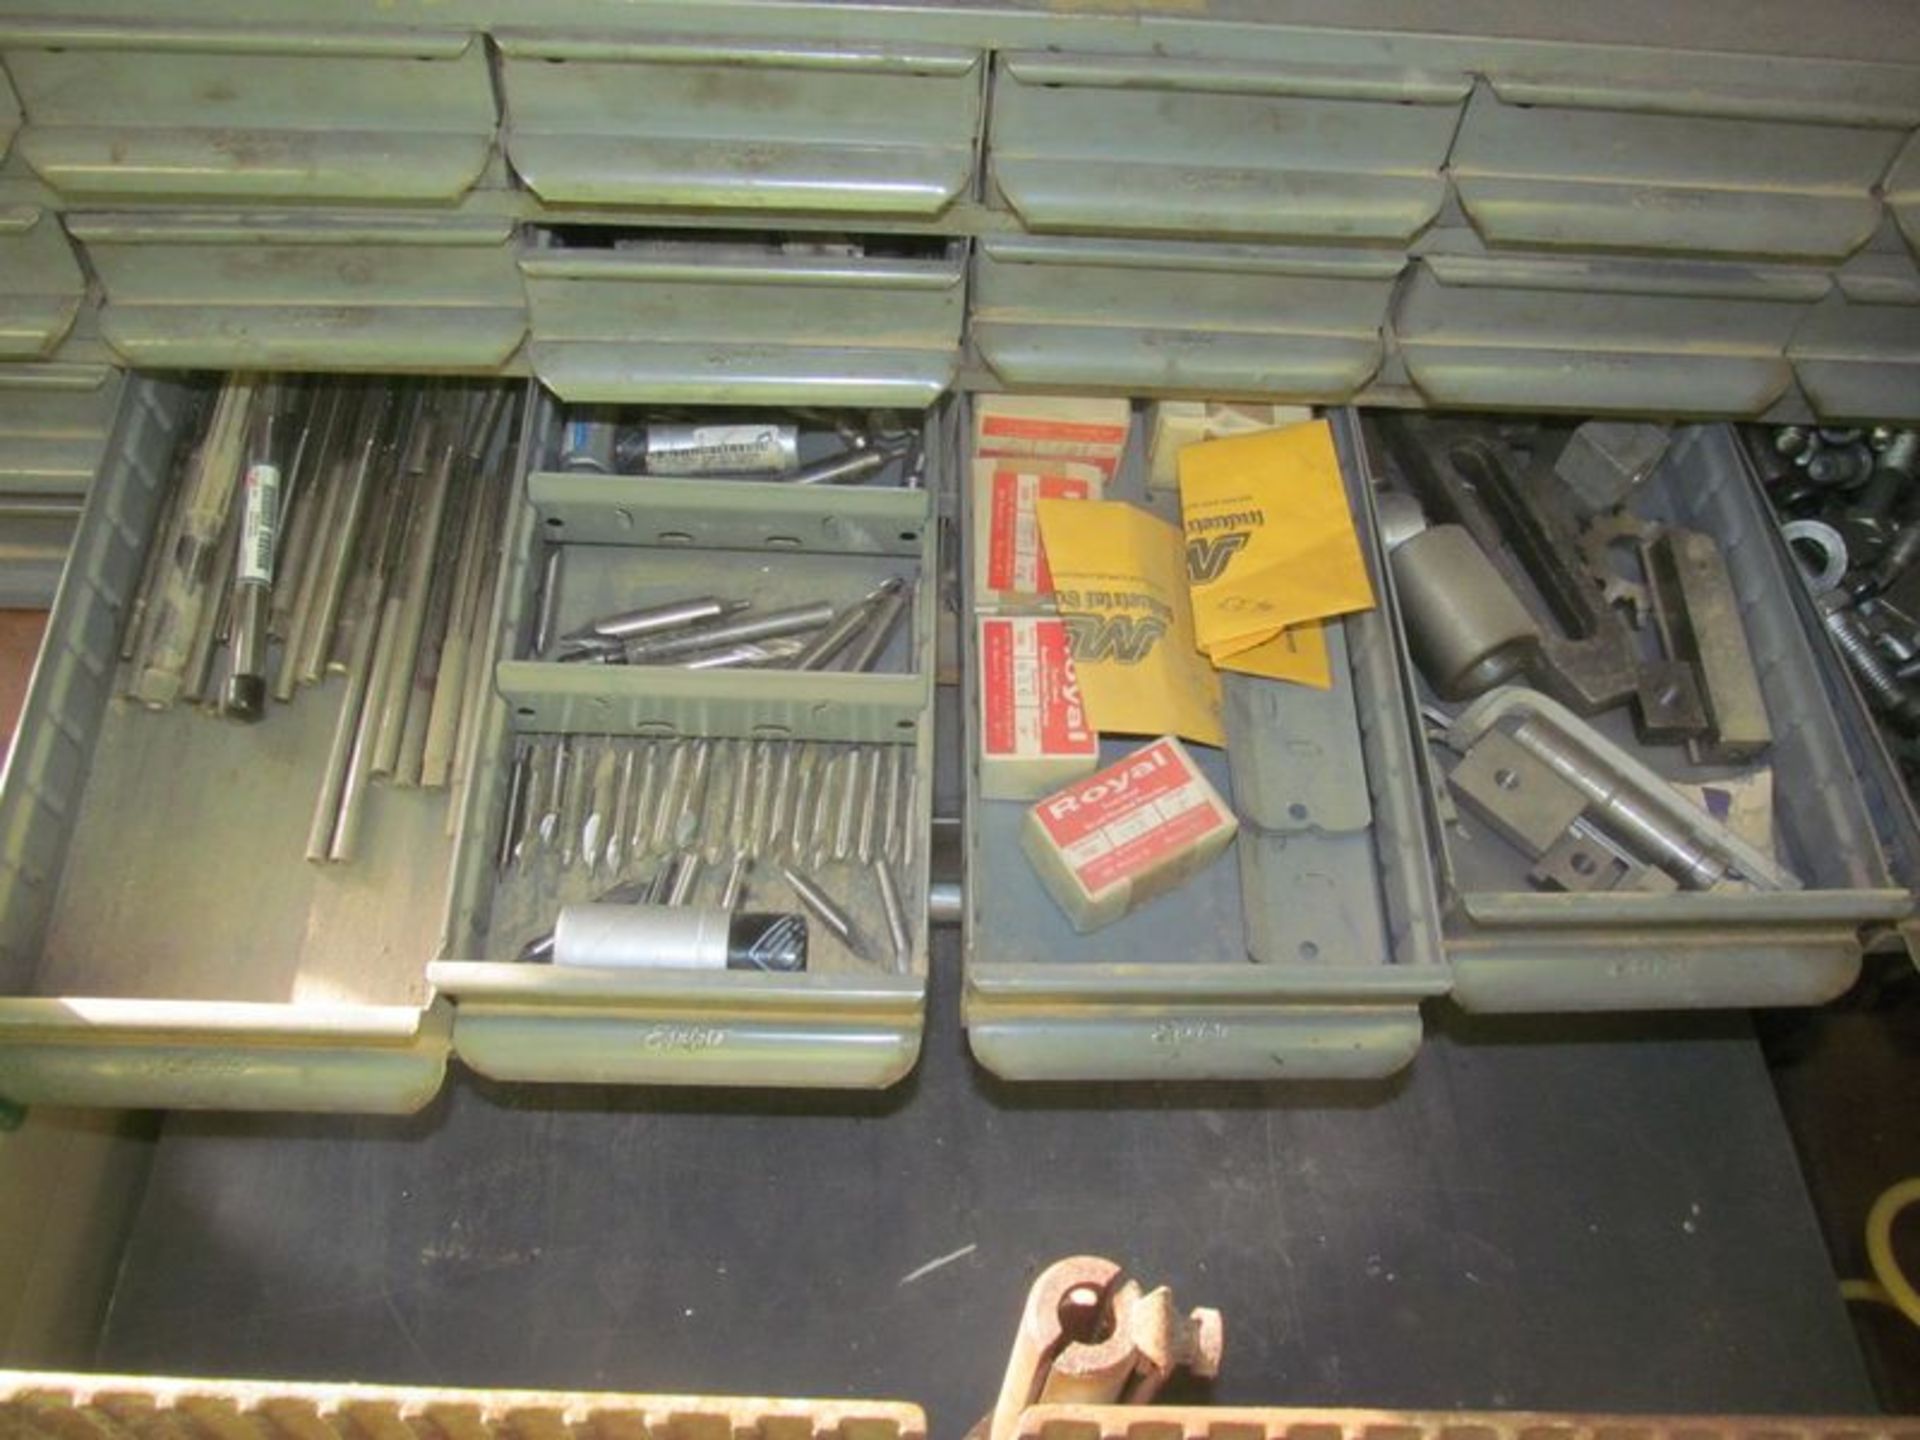 Lot ass't tools, hardware machining accessories, cutting tools, hardware, etc., with cabinets - Image 8 of 11